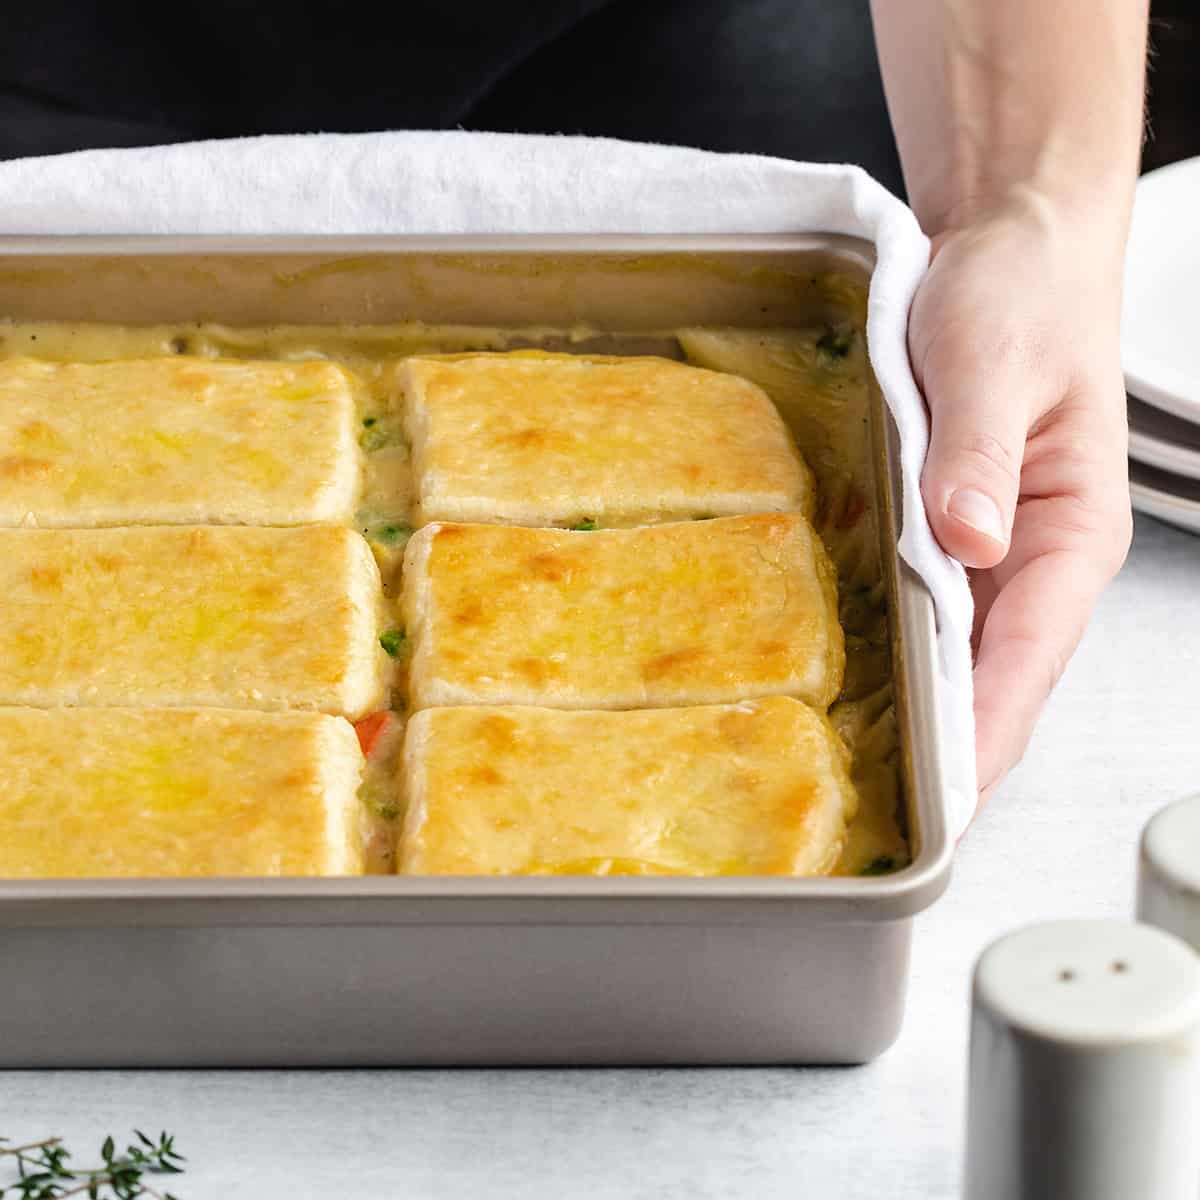 Vegetable Pot Pie Recipe in a baking dish after being baked